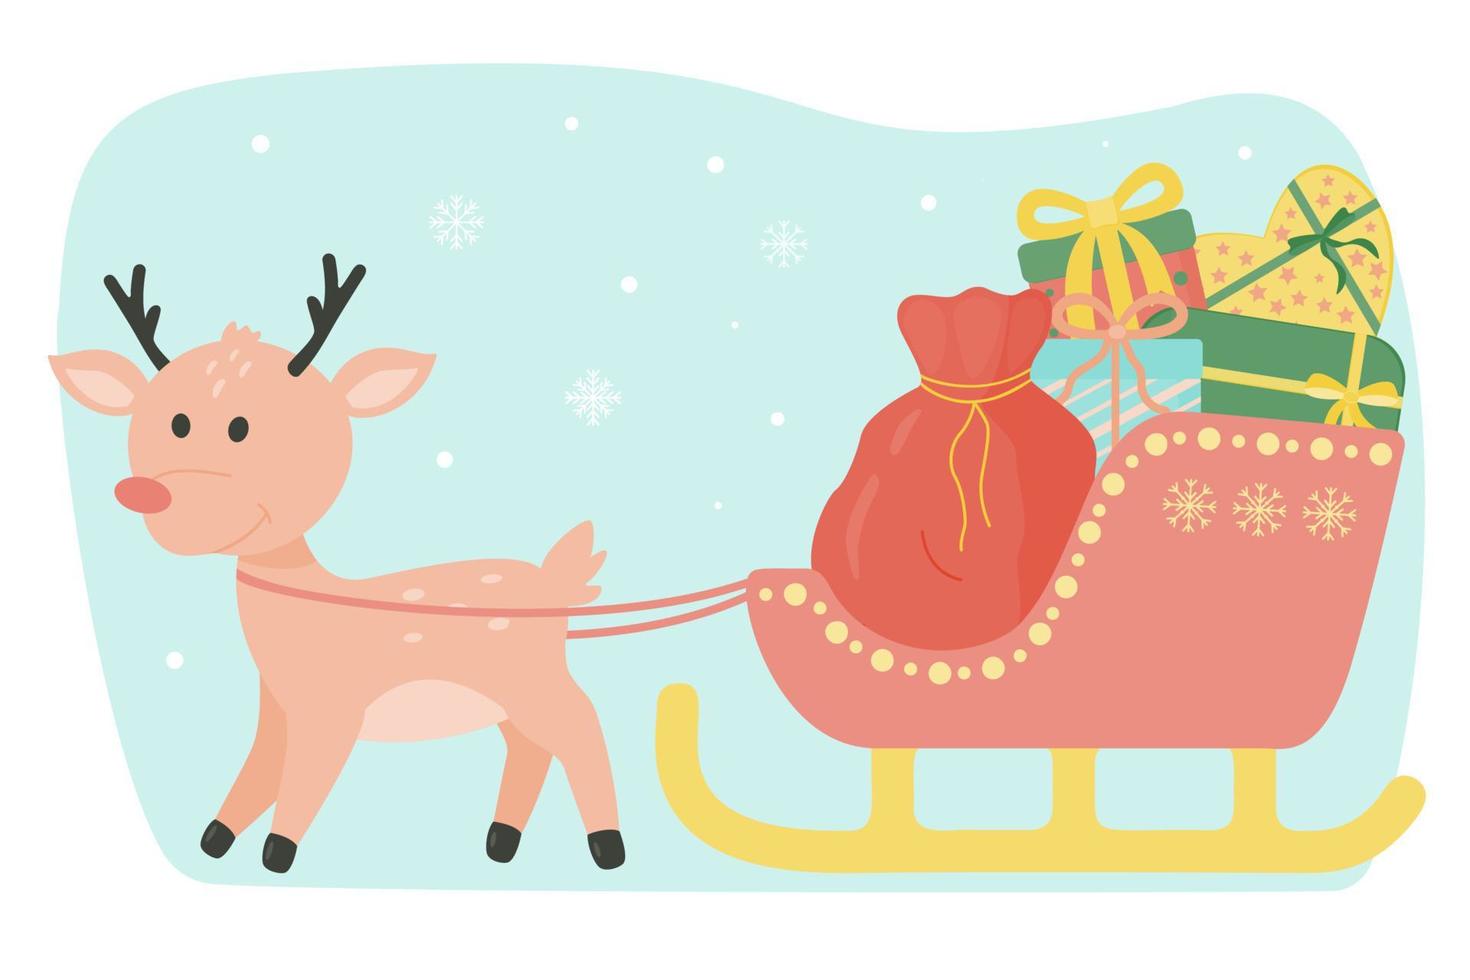 Vector drawing of a deer and Santa Claus's sleigh carrying gifts. Isolated on a white background.